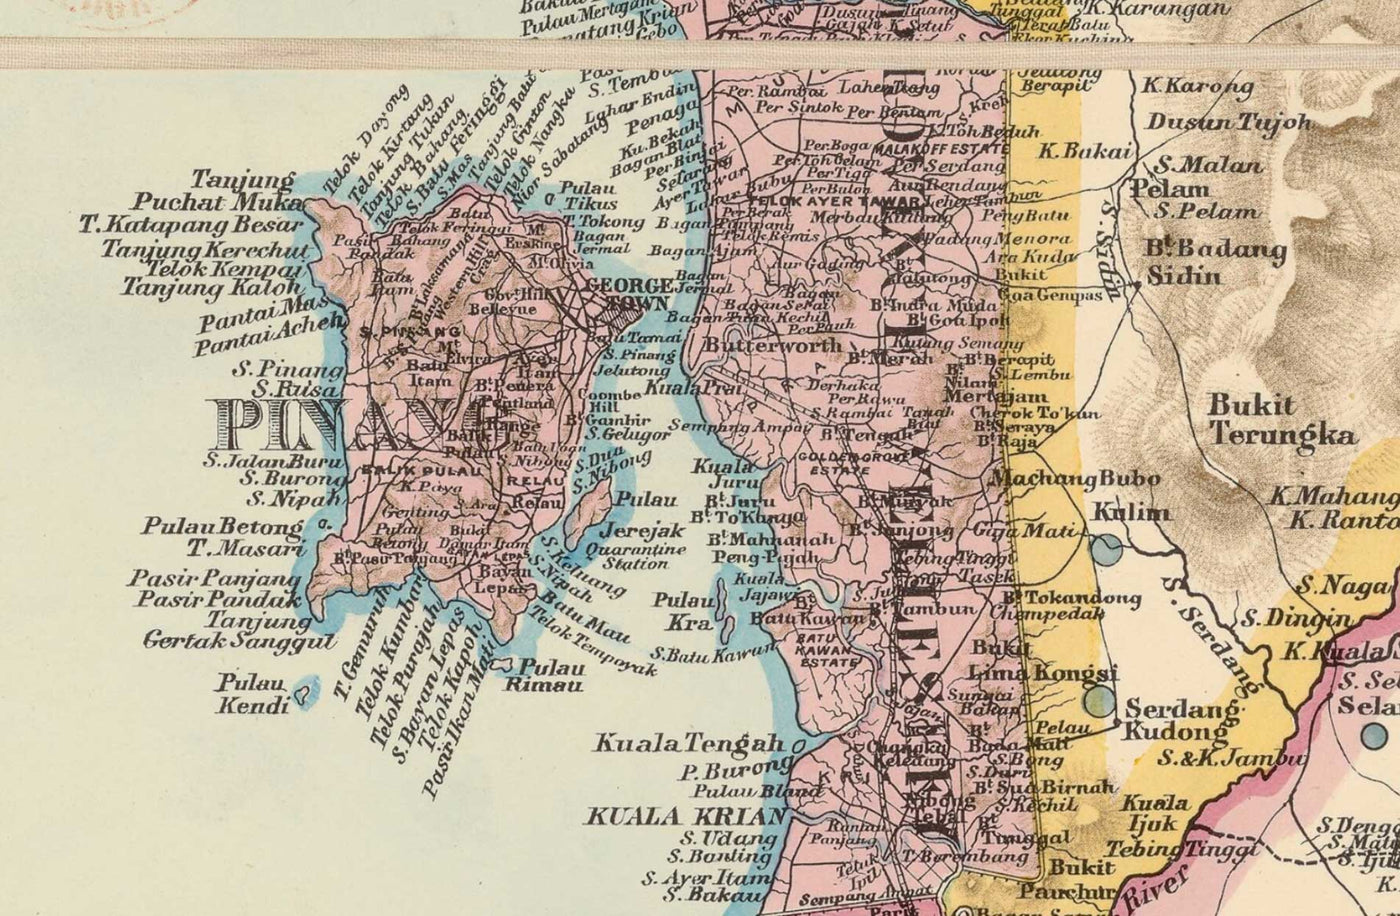 Old Map of the Malay Peninsula in 1898 by Cuylenburg & Stanford - Malaysia, Thailand, Singapore, Johor, Malacca